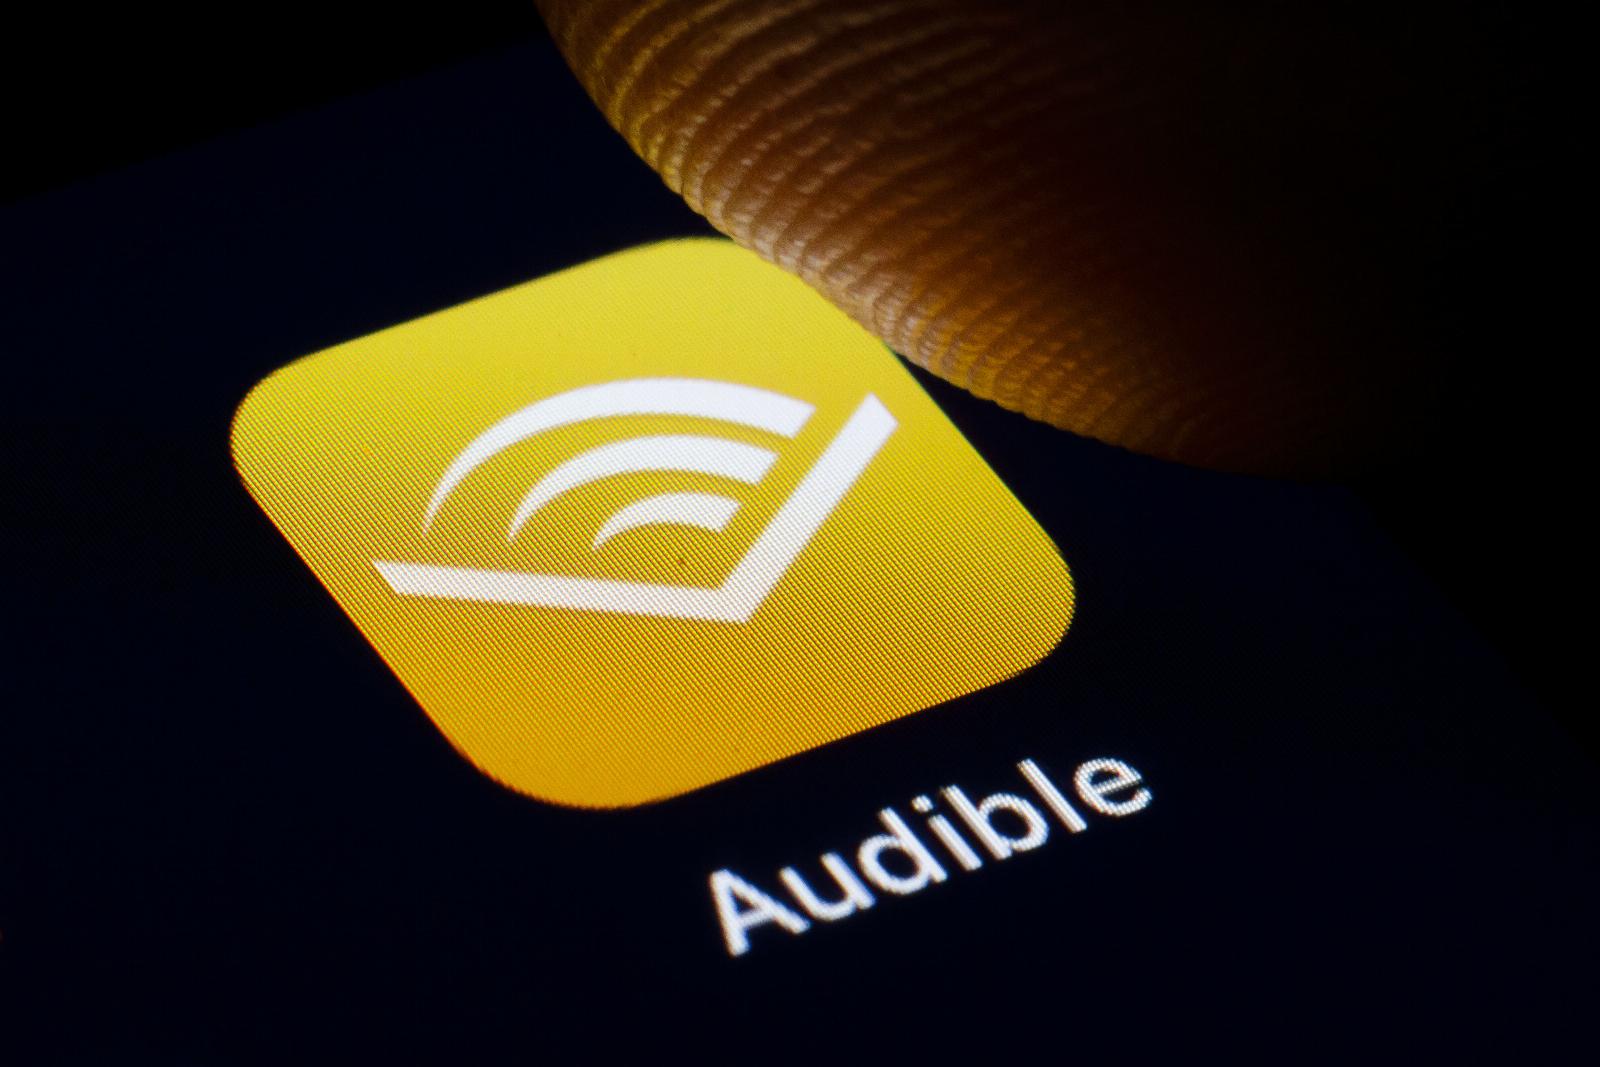 Audible set to launch its first audio-only singing competition series with judges Kelly Rowland & Sara Bareilles